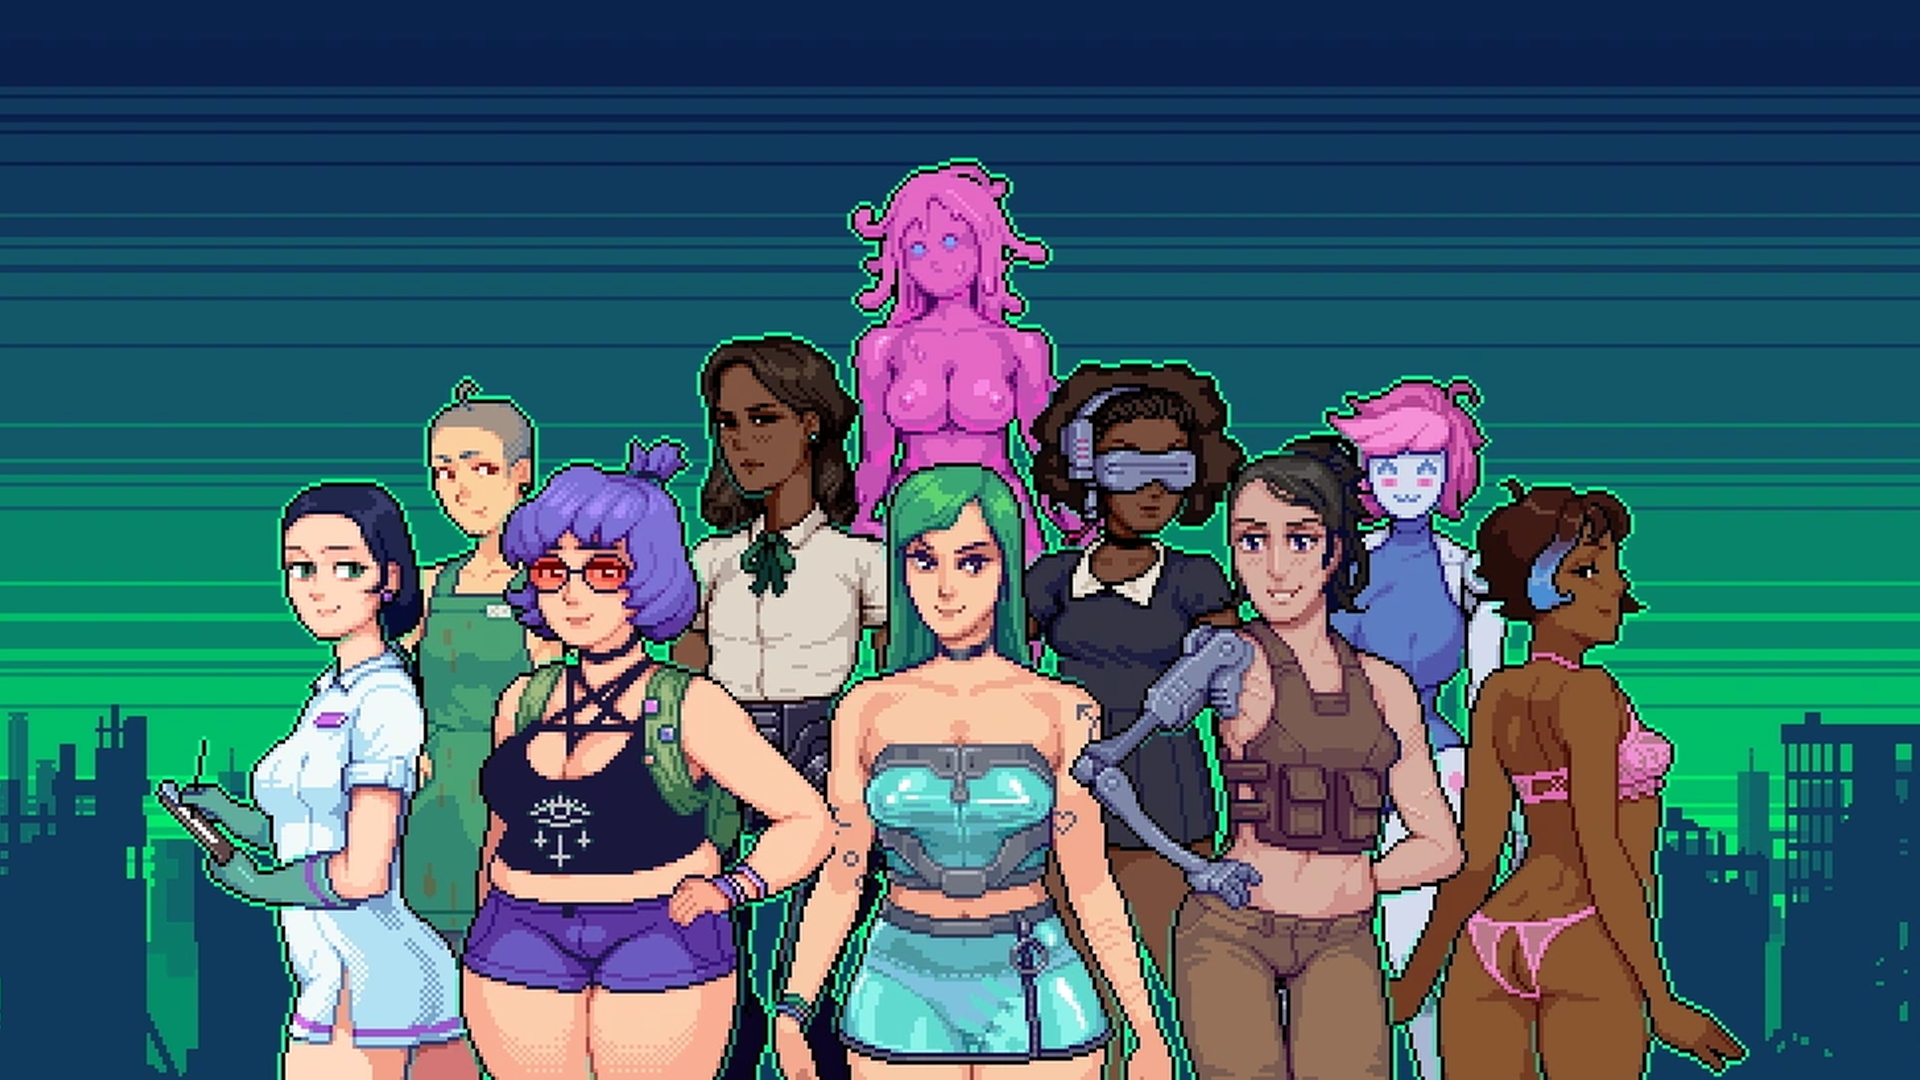 Best sex games - The cast of Hardcoded